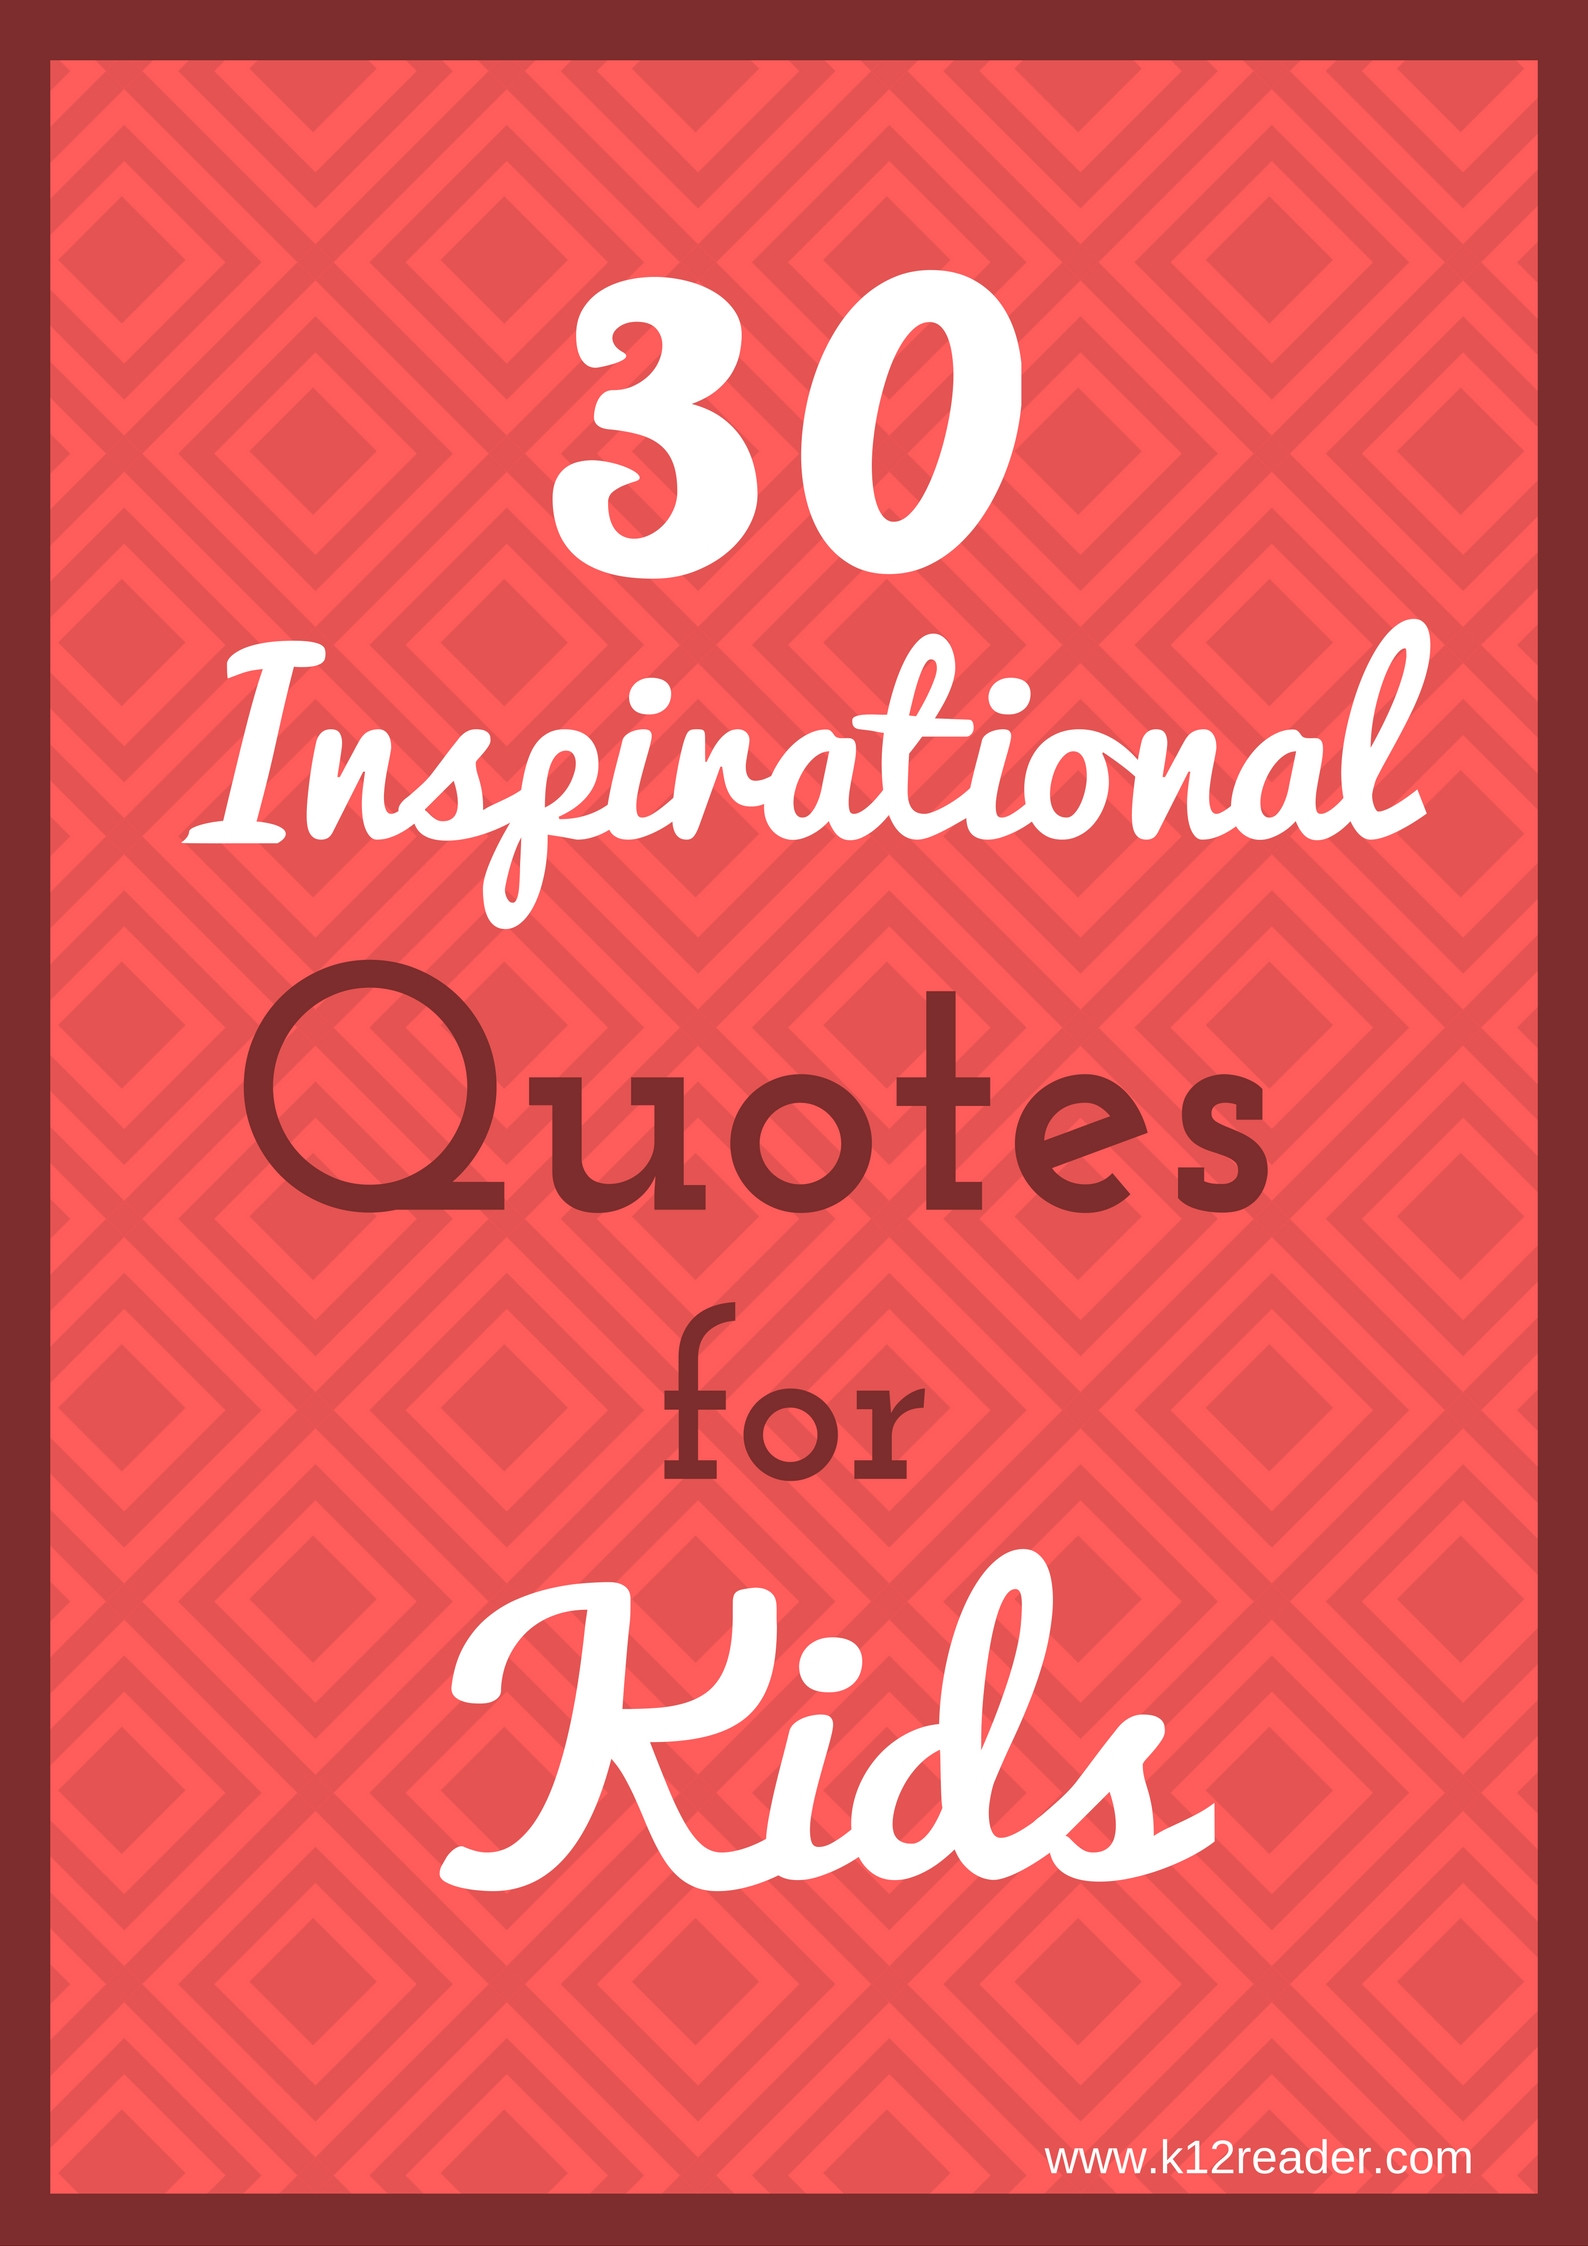 Inspirational Kid Quotes
 30 Inspirational Quotes for Kids